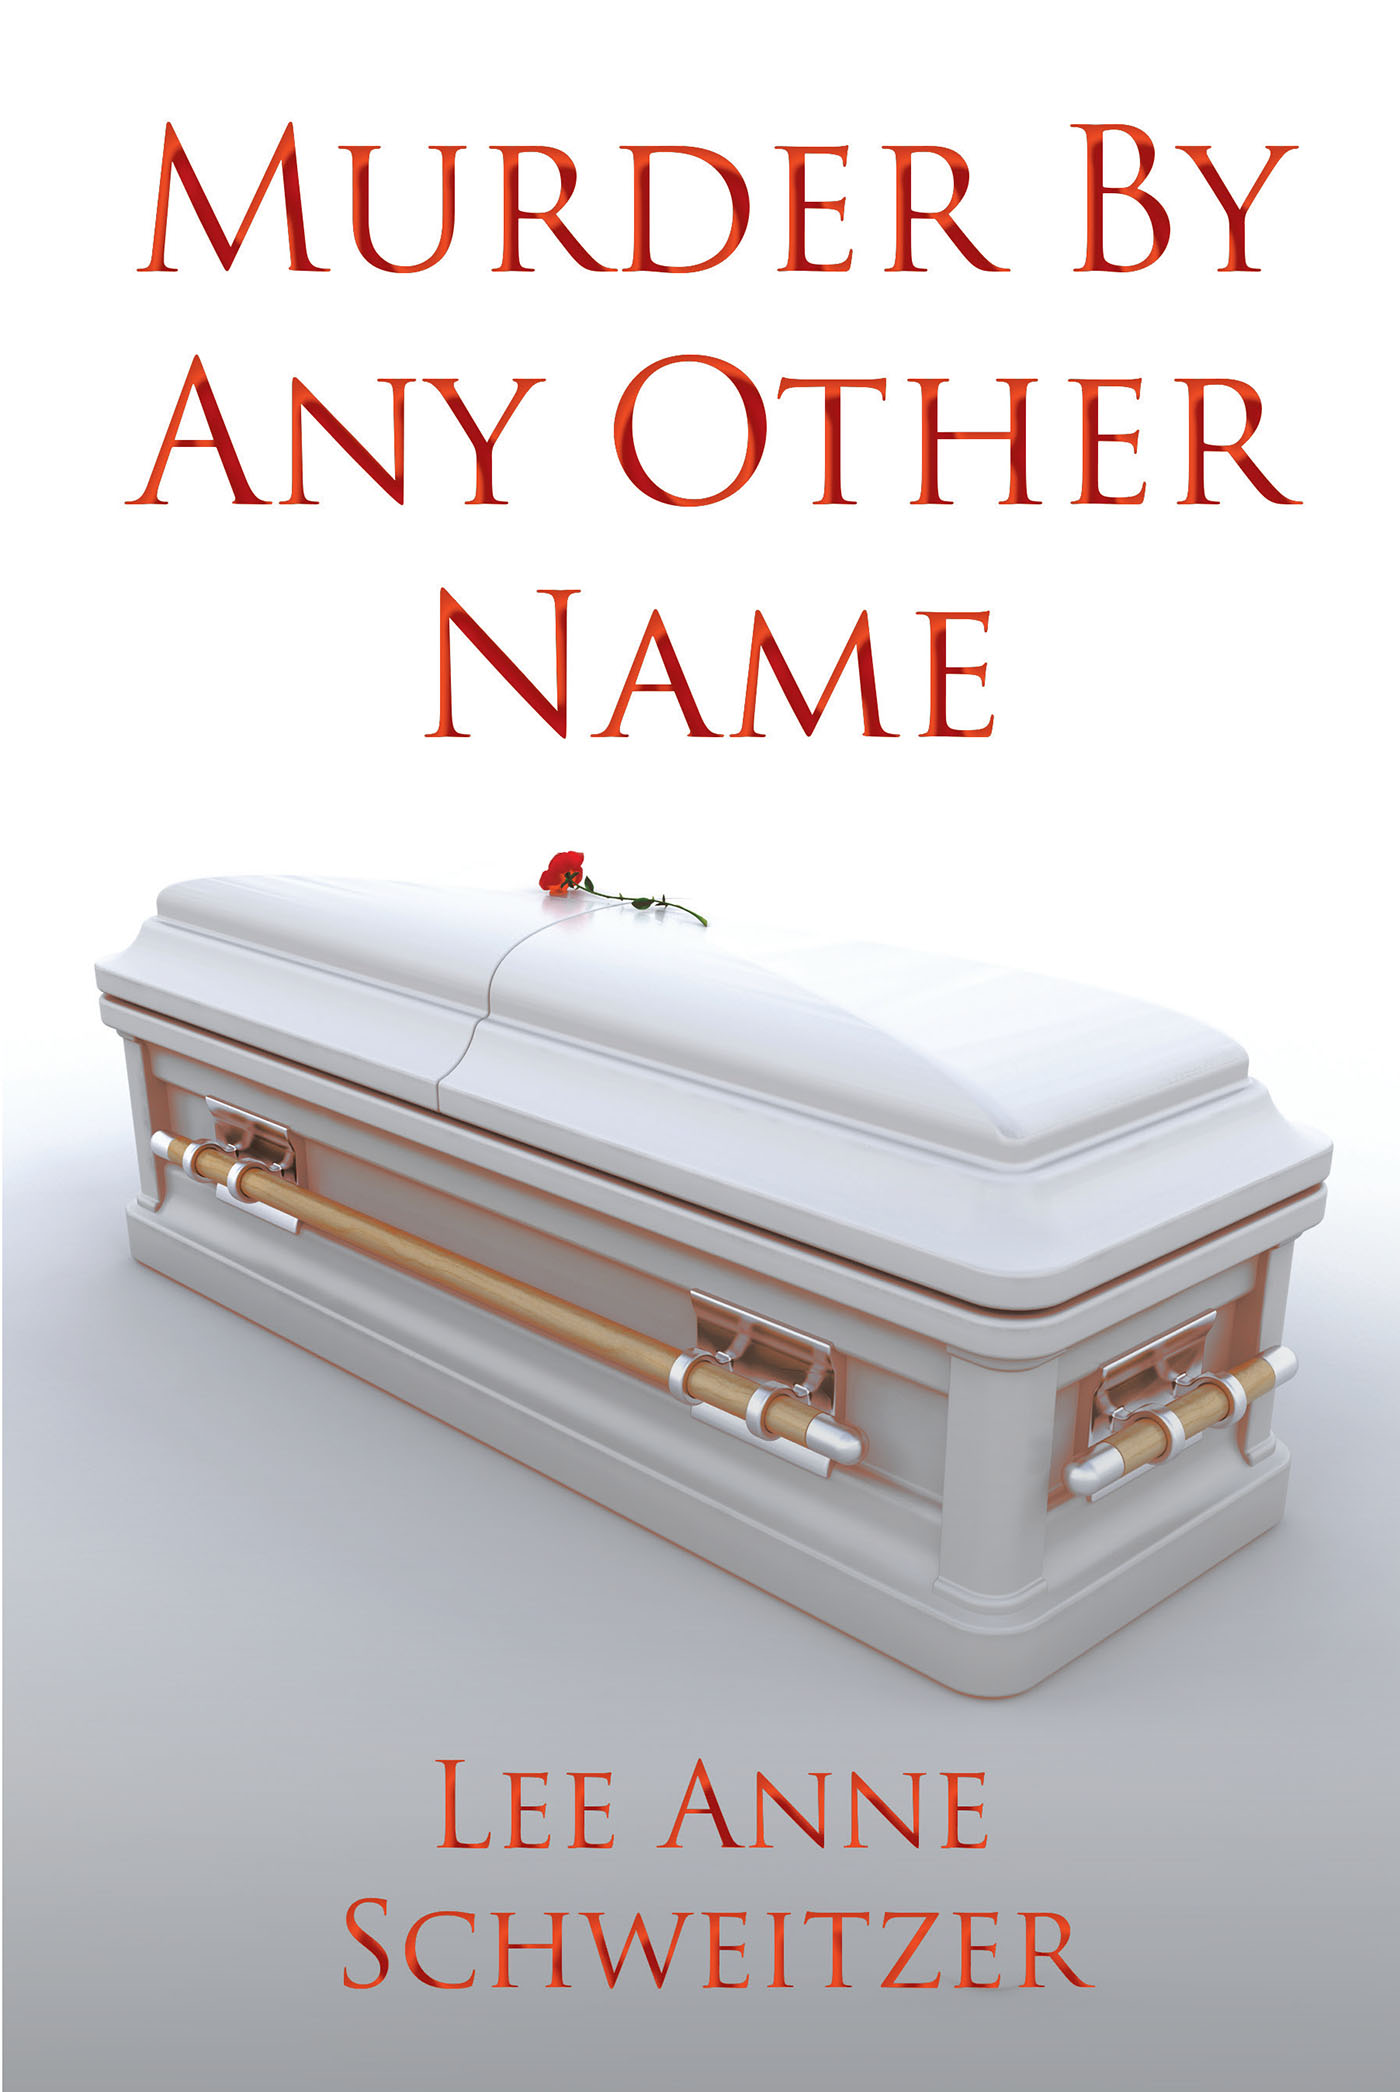 Author Lee Anne Schweitzer’s New Book, “Murder By Any Other Name,” Centers Around the Death of a Small Town Music Teacher, Which Quickly Turns Into a Murder Investigation